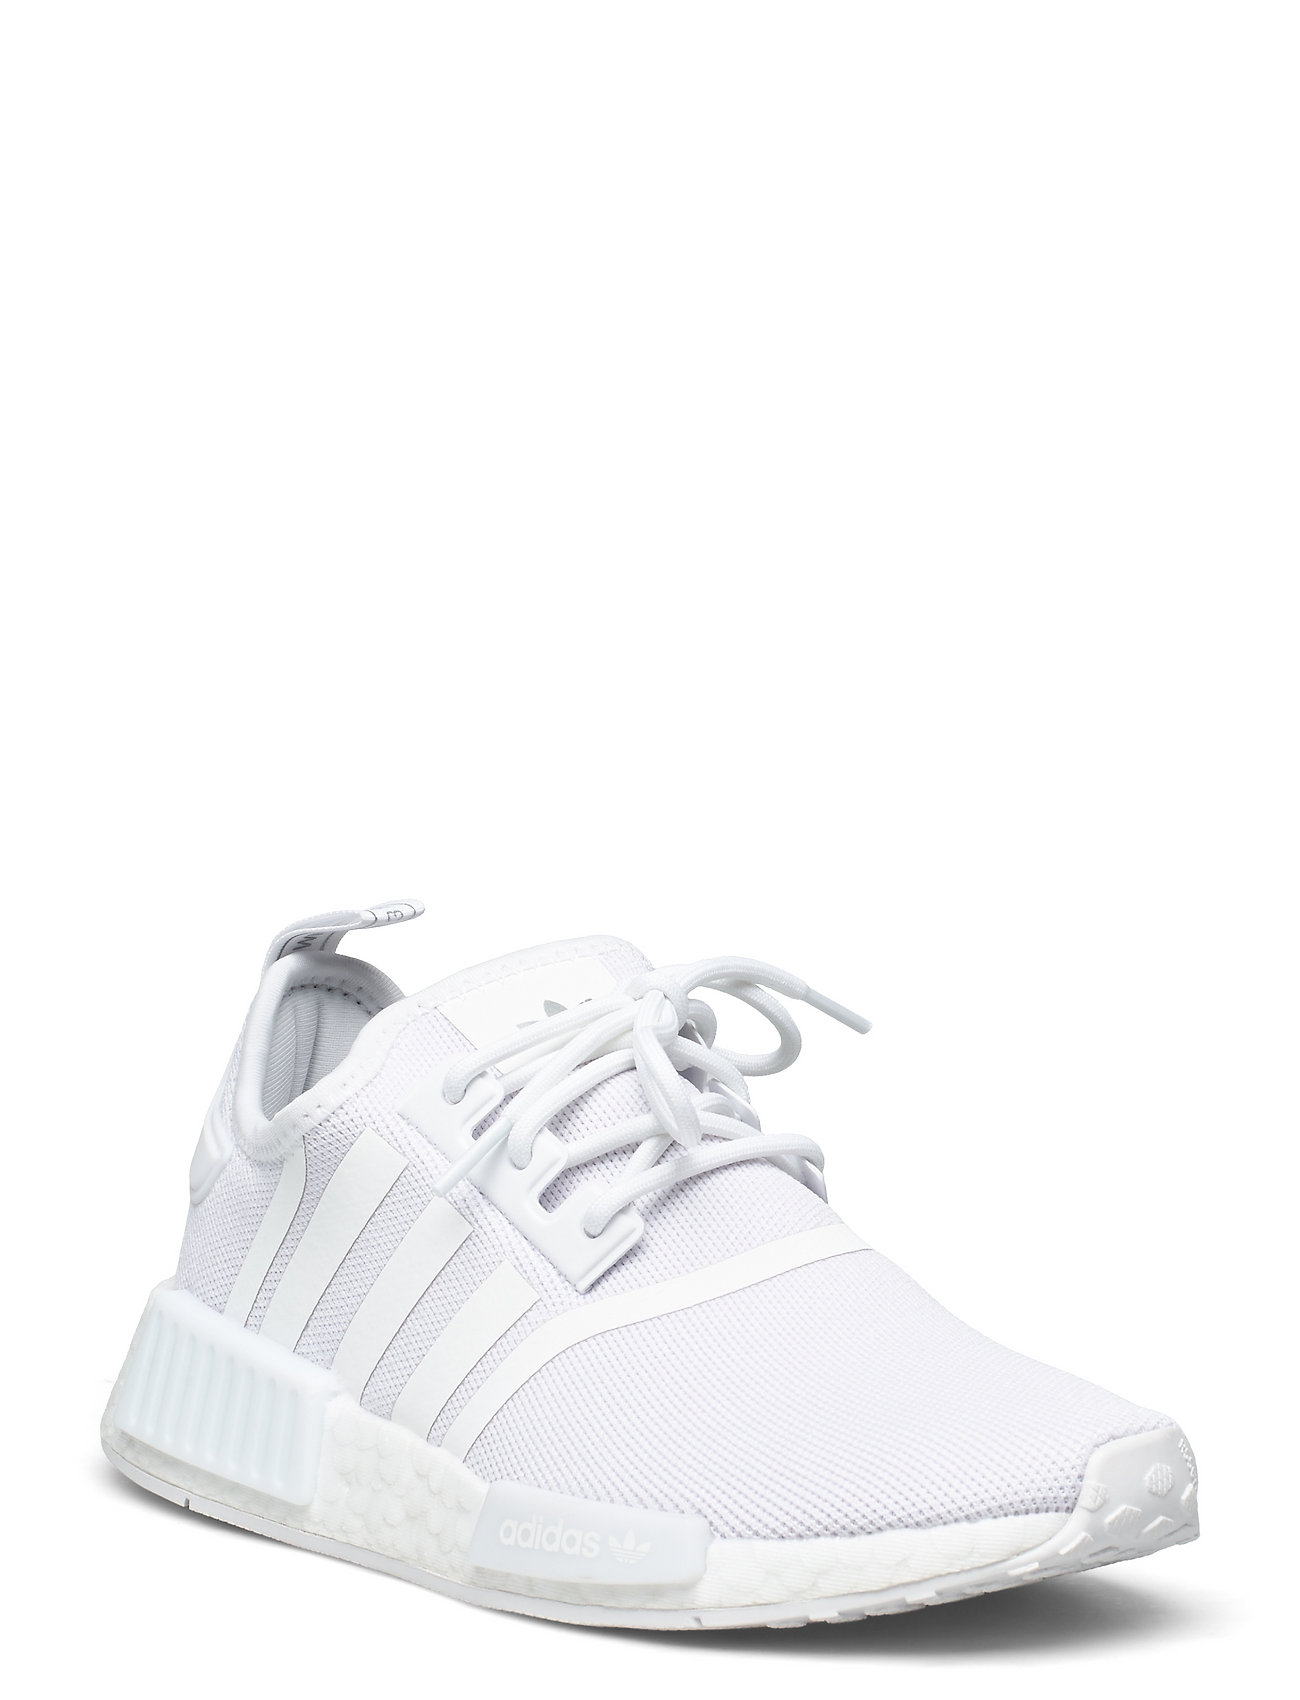 Nmd_R1 Primeblue Shoes Sport Sneakers Low-top Sneakers White Adidas Originals